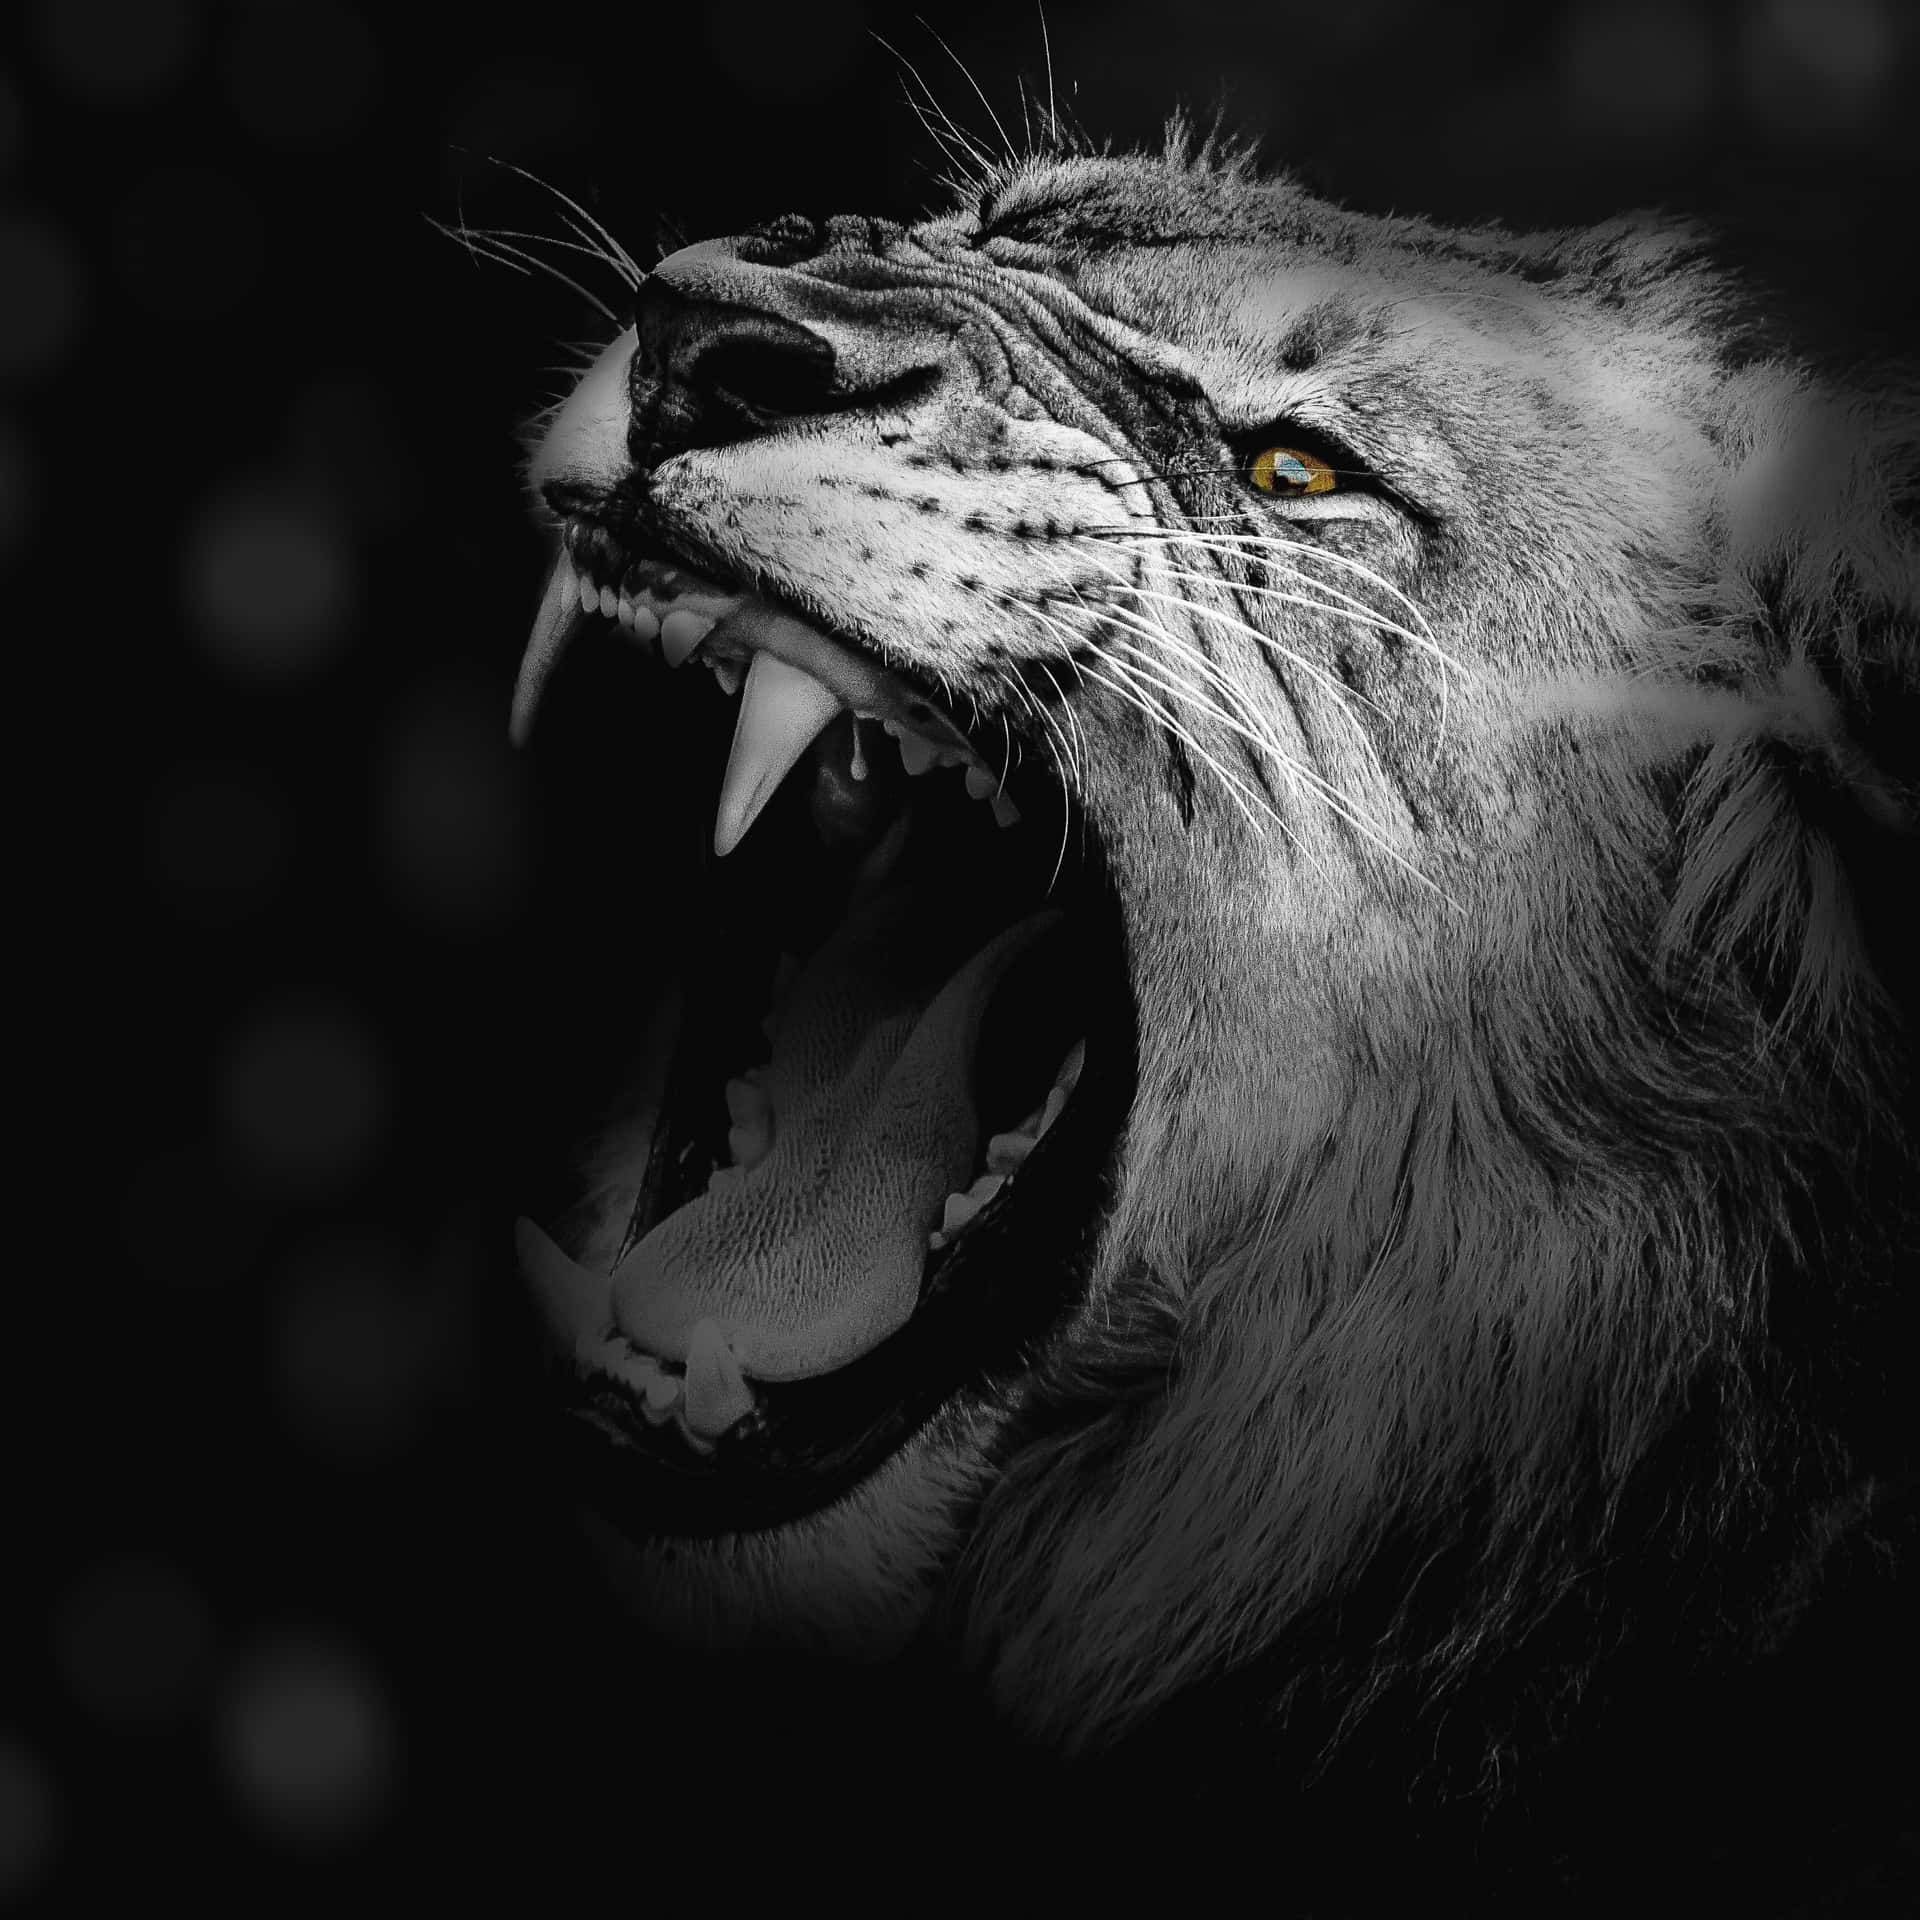 “Loud, bold, and powerful - the Roaring Lion.” Wallpaper